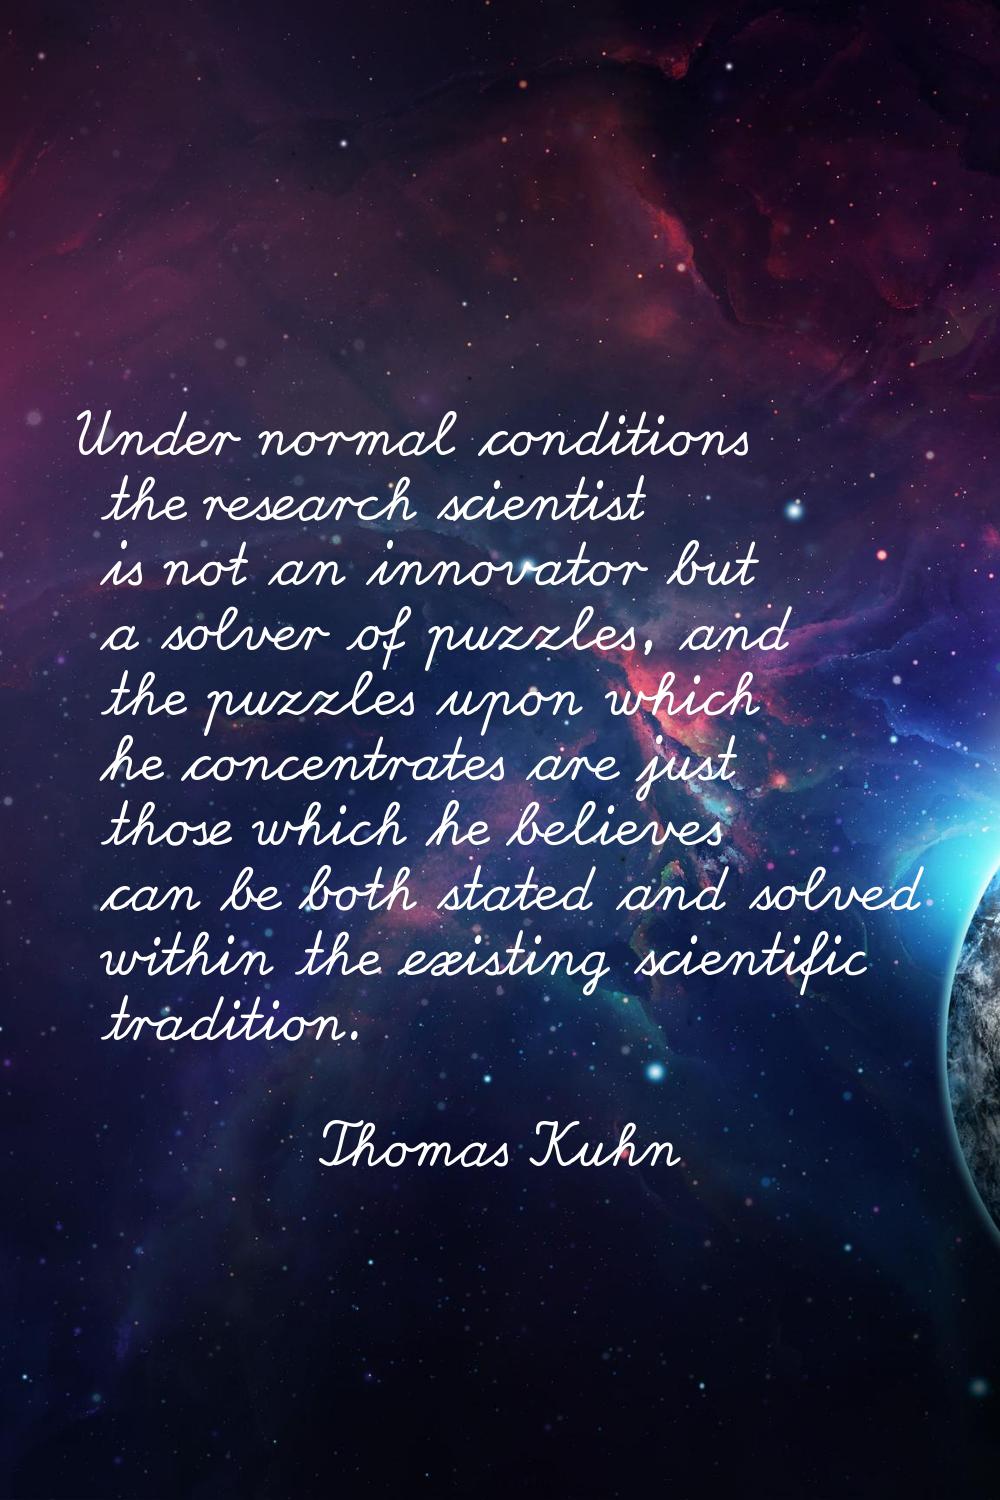 Under normal conditions the research scientist is not an innovator but a solver of puzzles, and the